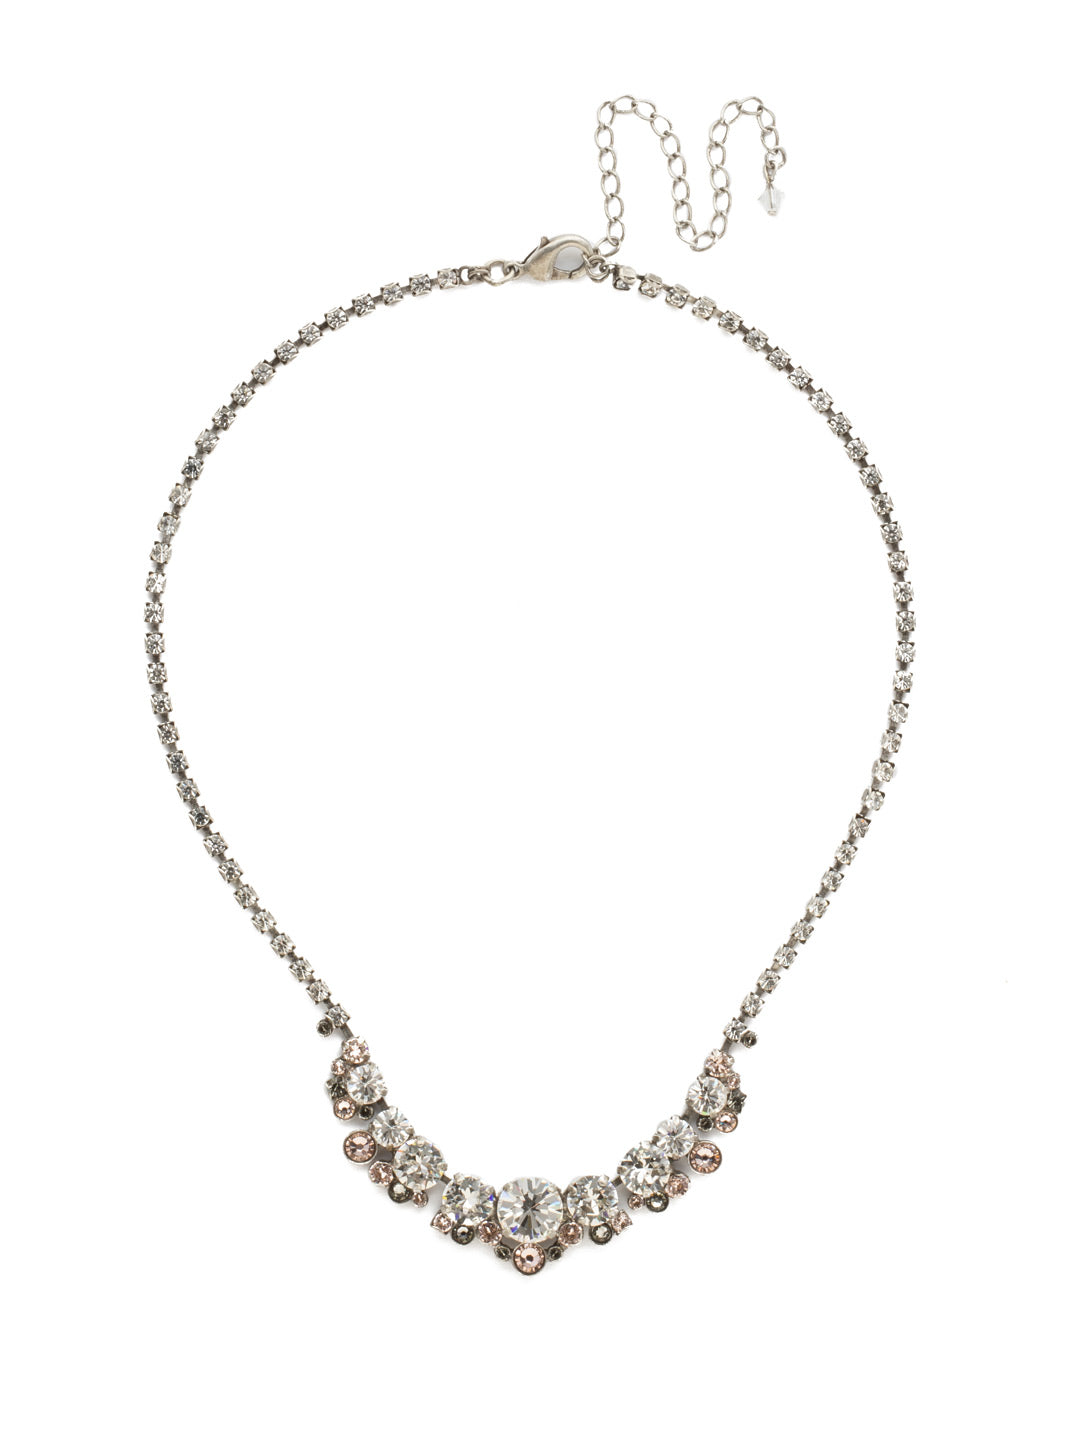 Multi-cut Round Crystal Cluster Line Tennis Necklace - NCW11ASSNB